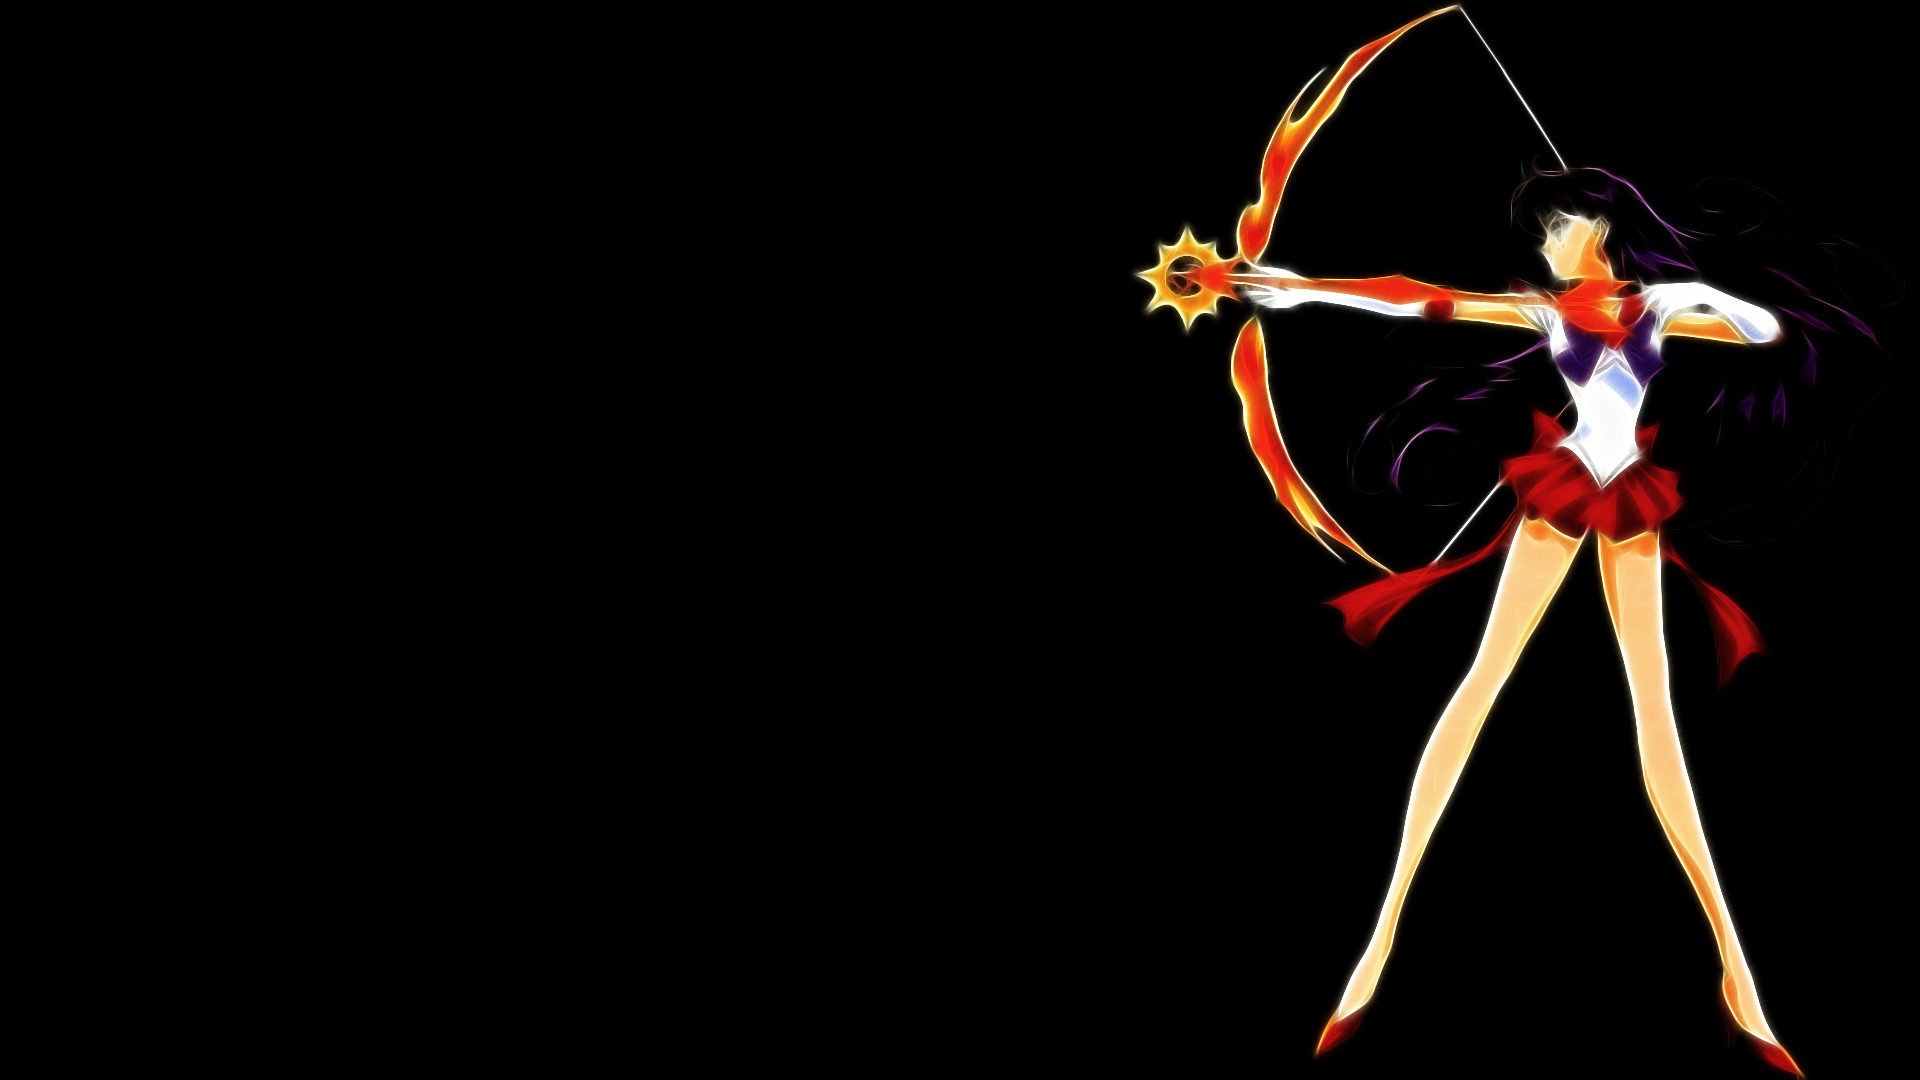 1920x1080 Best Sailor Moon Wallpaper for Android Wallpaper